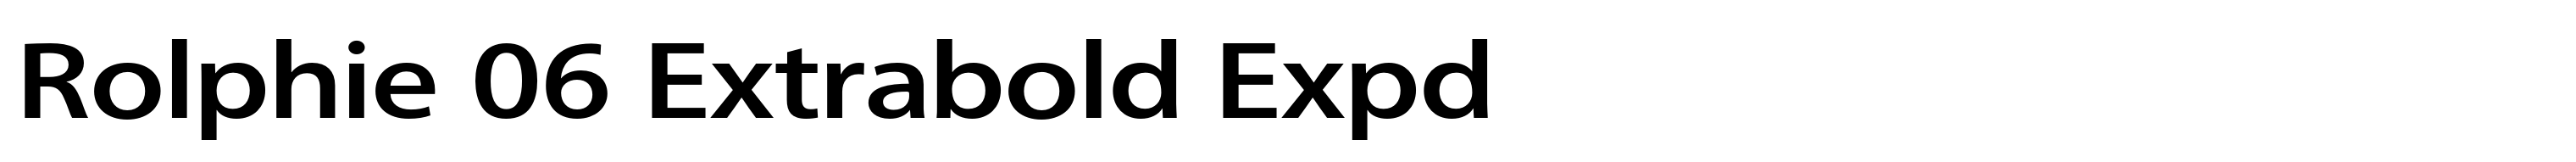 Rolphie 06 Extrabold Expd